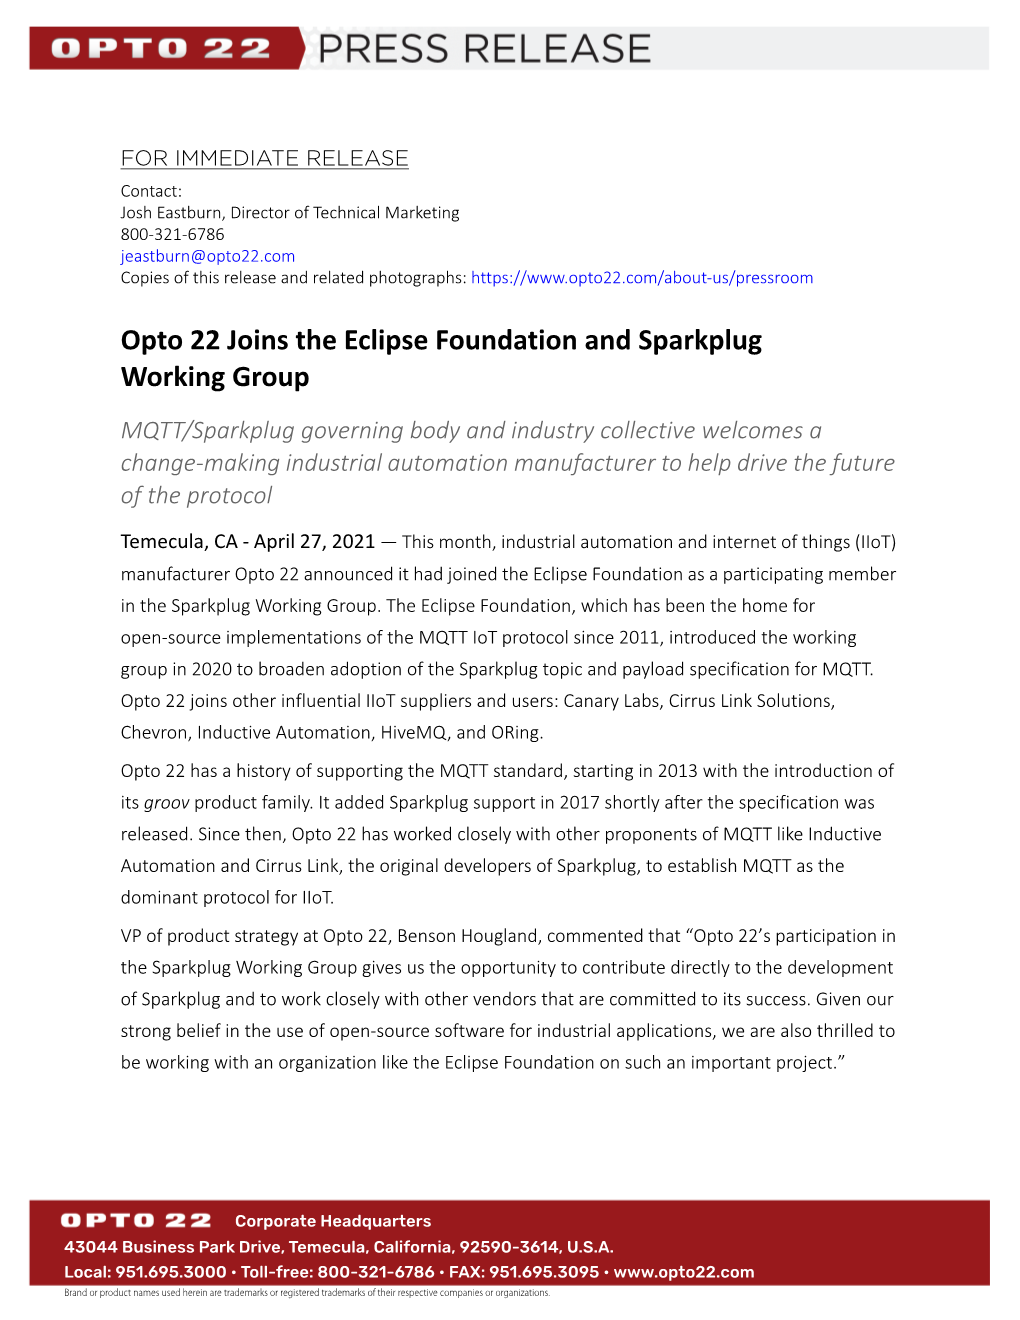 Opto 22 Joins Eclipse Foundation and Sparkplug Working Group